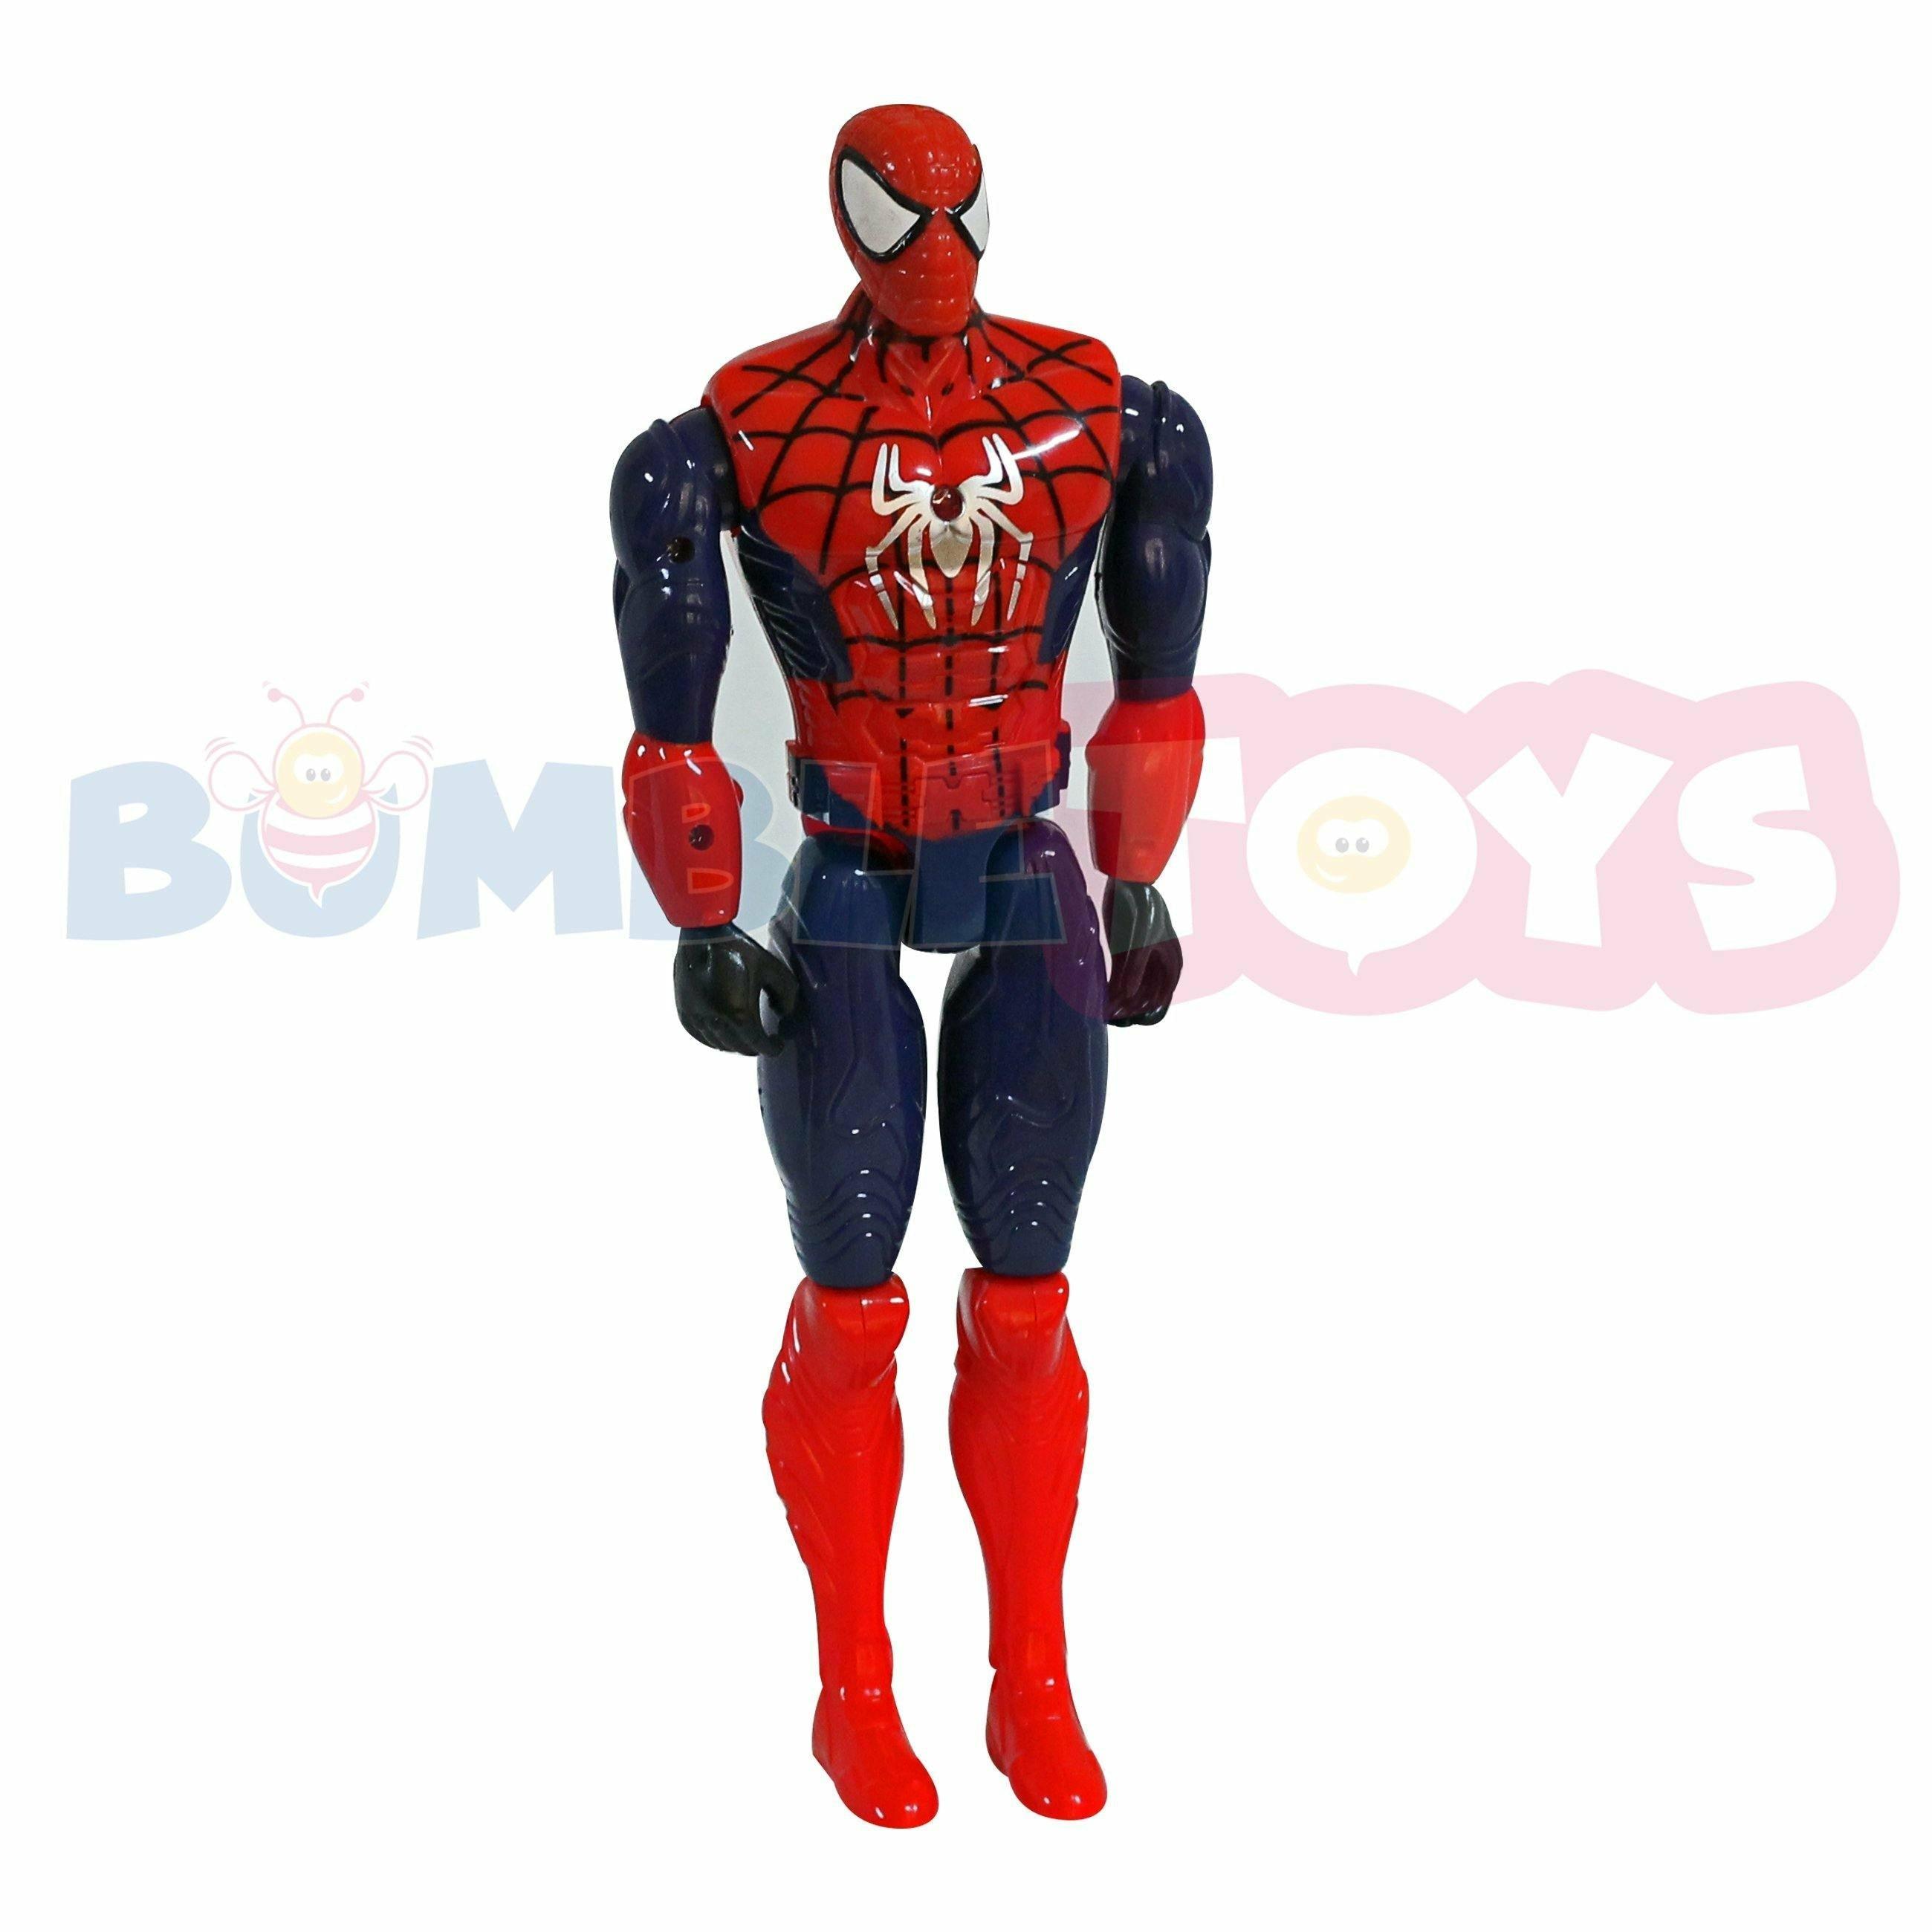 Avengers Heroes Action Figures Series 29 CM - BumbleToys - 5-7 Years, Avengers, Boys, Figures, Toy House